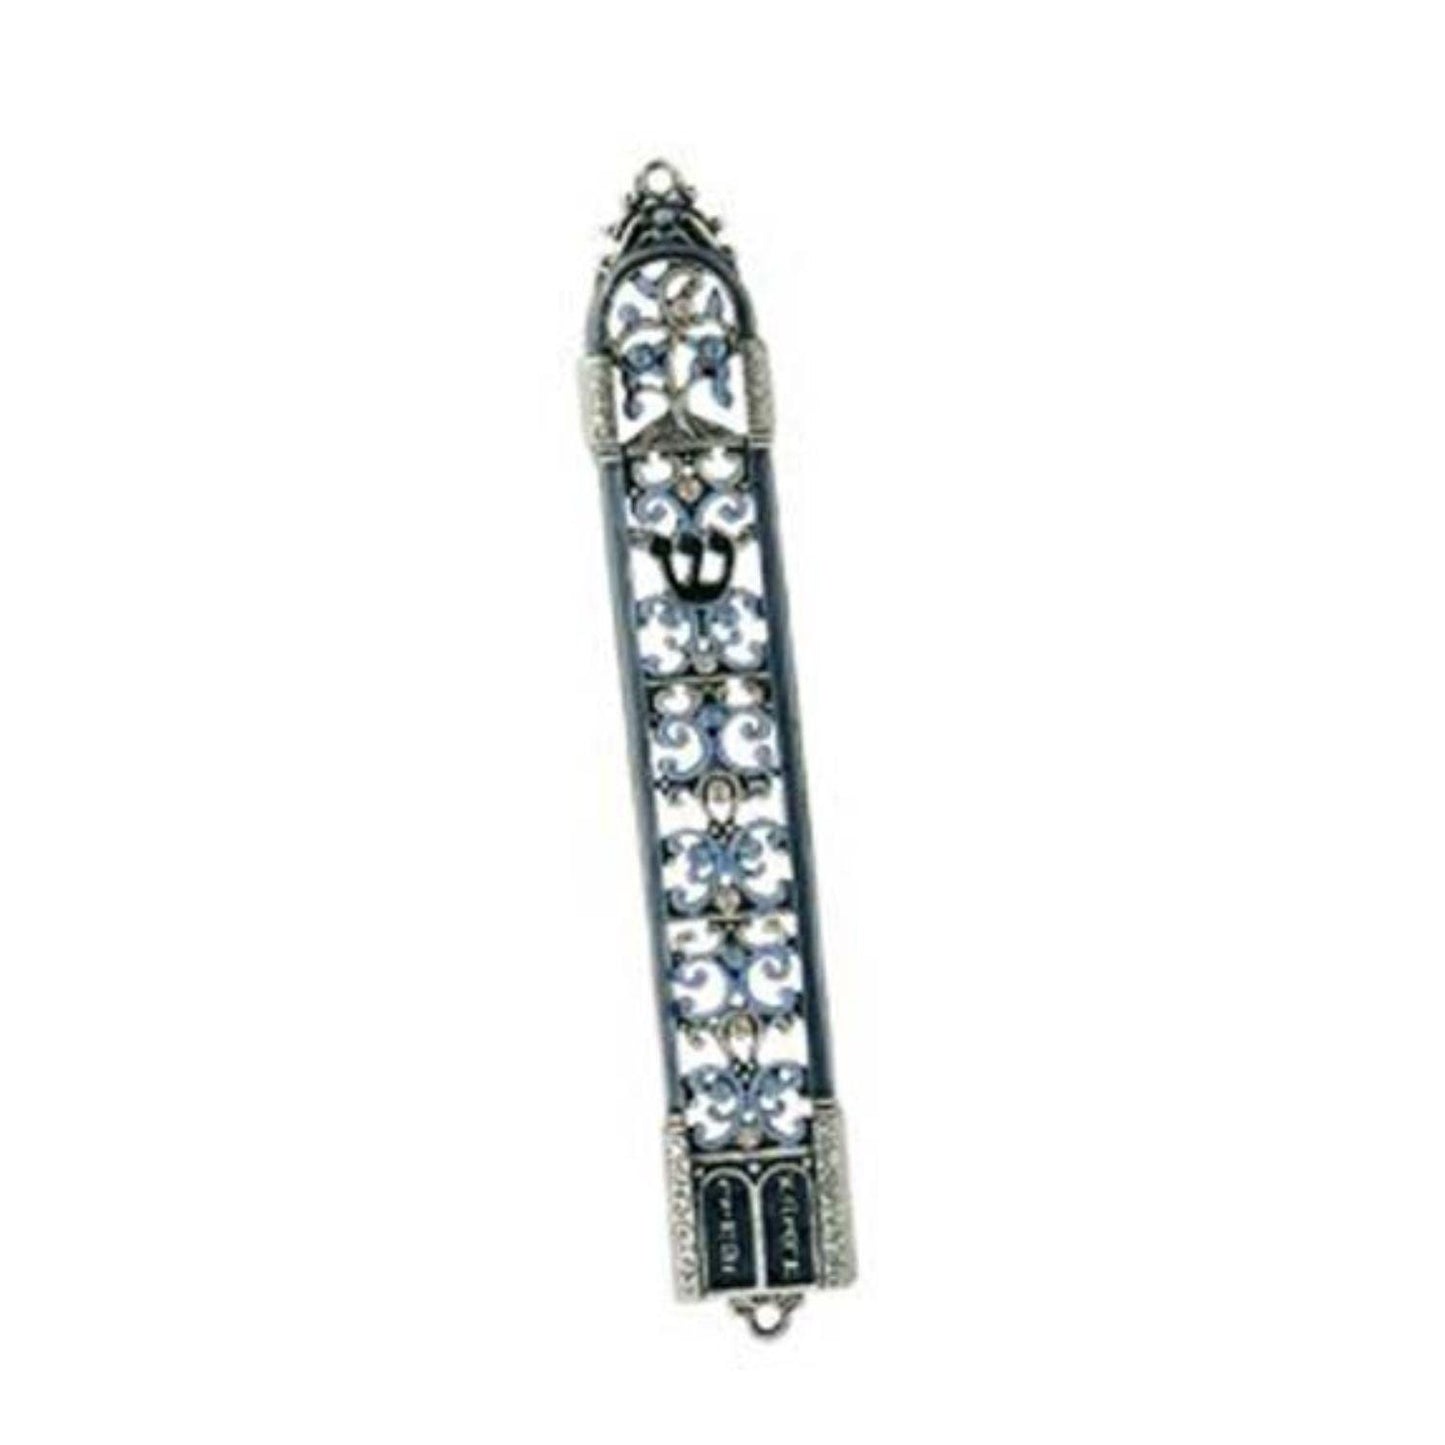 5" Hand Painted Classic Mezuzah By Quest Gifts by Quest Collection